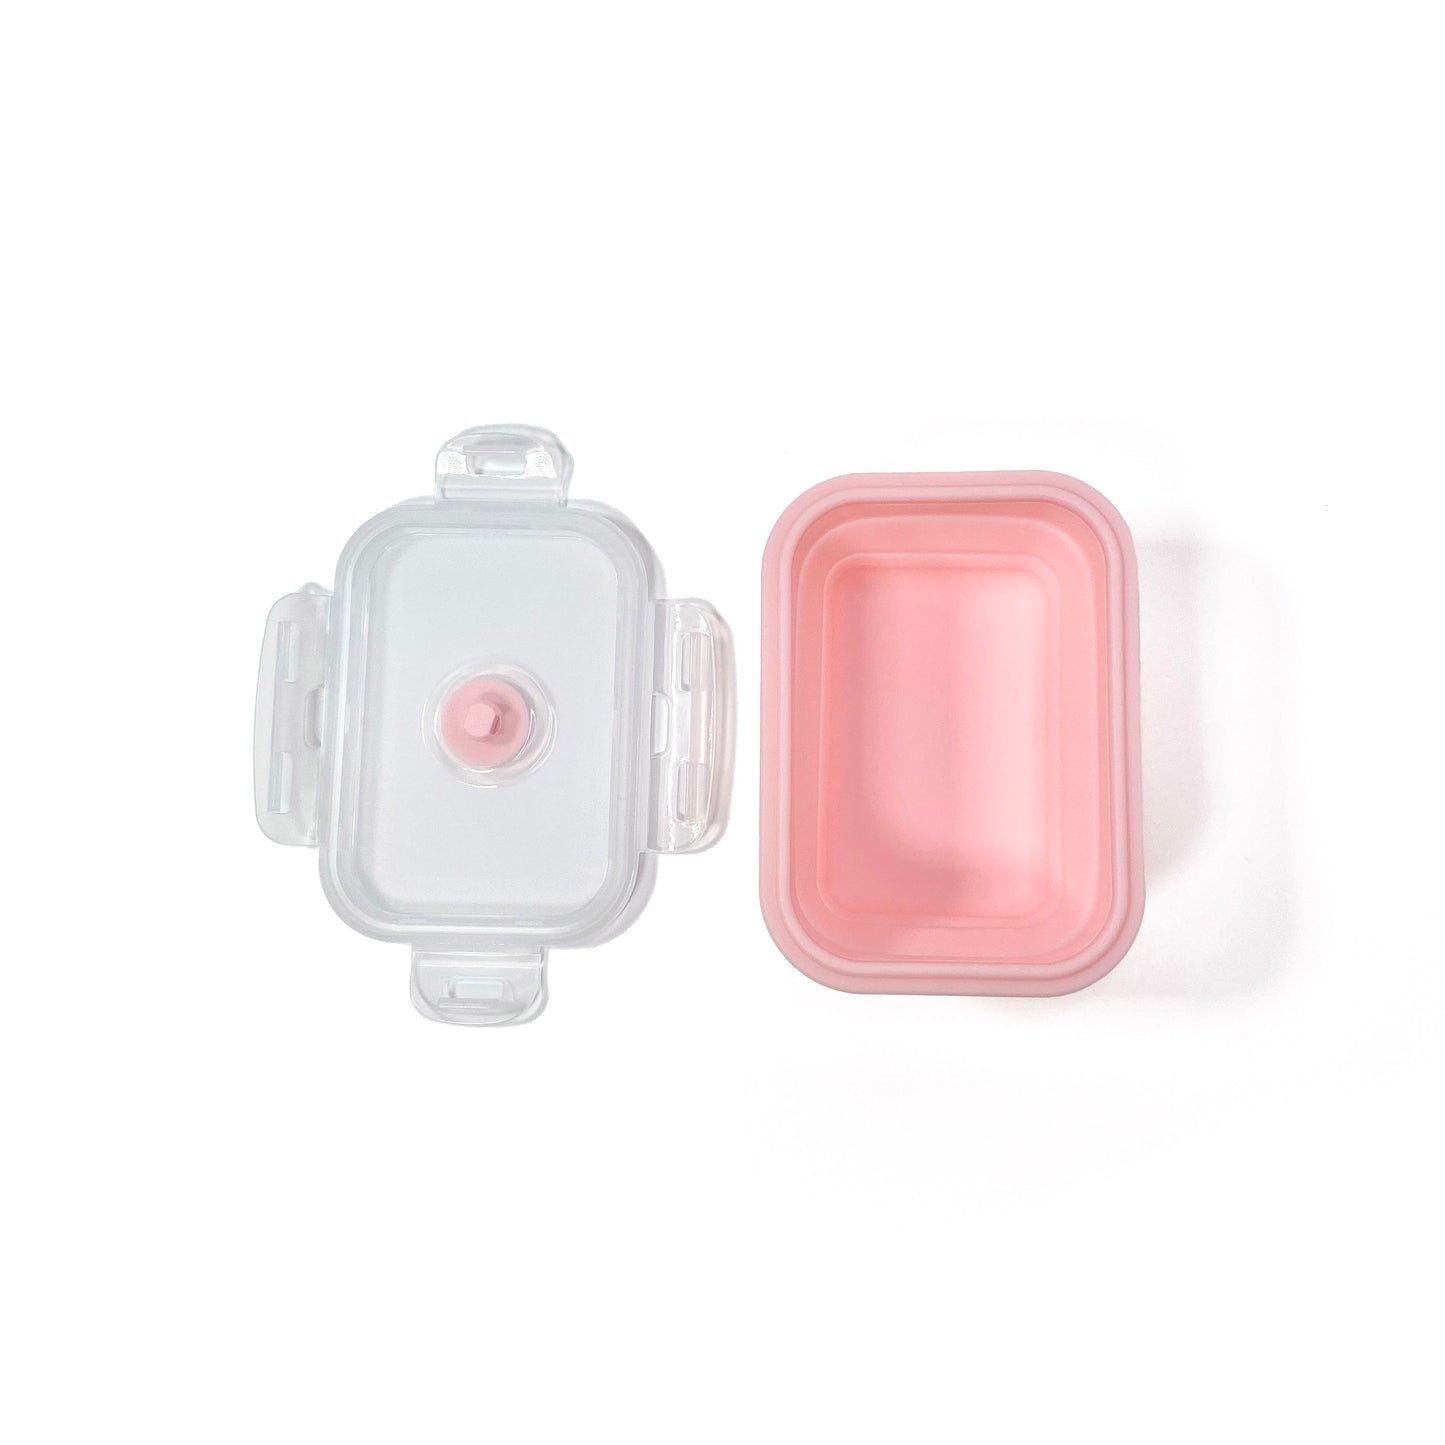 A collapsible pink rectangular silicone food storage tub with lid. View from above, with the tub expanded to full size and lid removed.